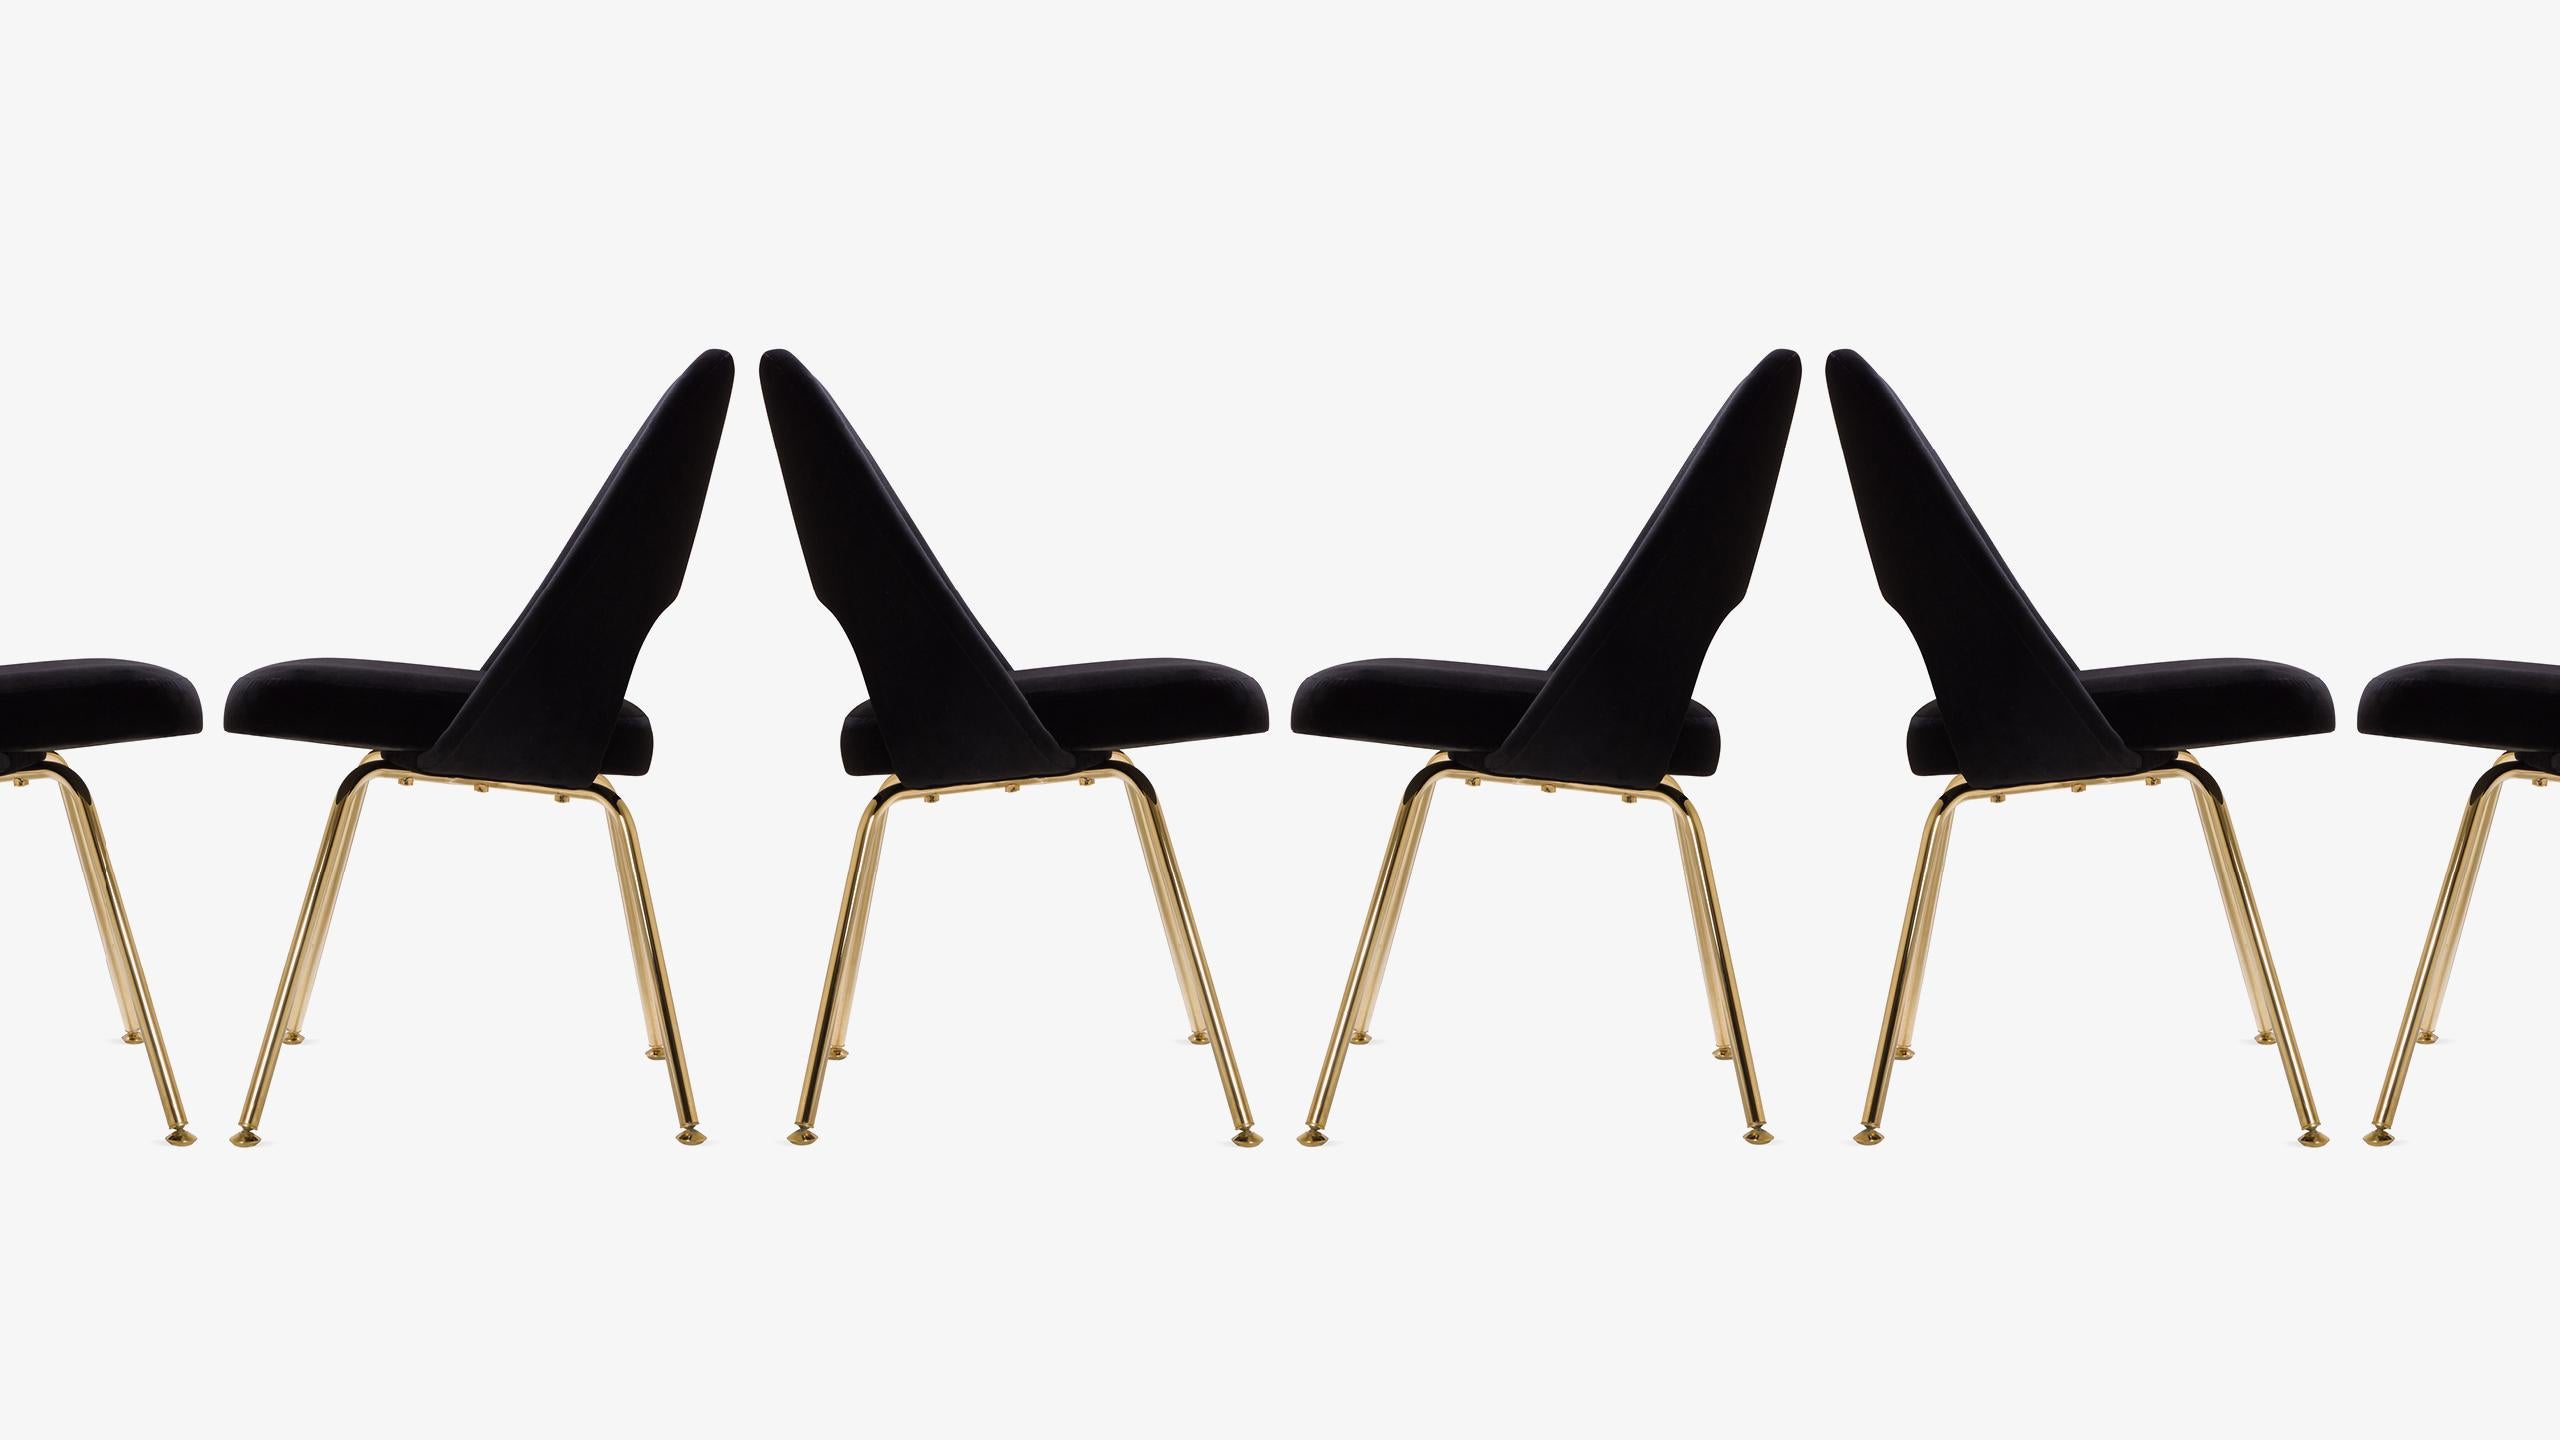 Saarinen Executive Armless Chairs in Noir Velvet, Gold Edition, Set of 6 In Excellent Condition For Sale In Wilton, CT